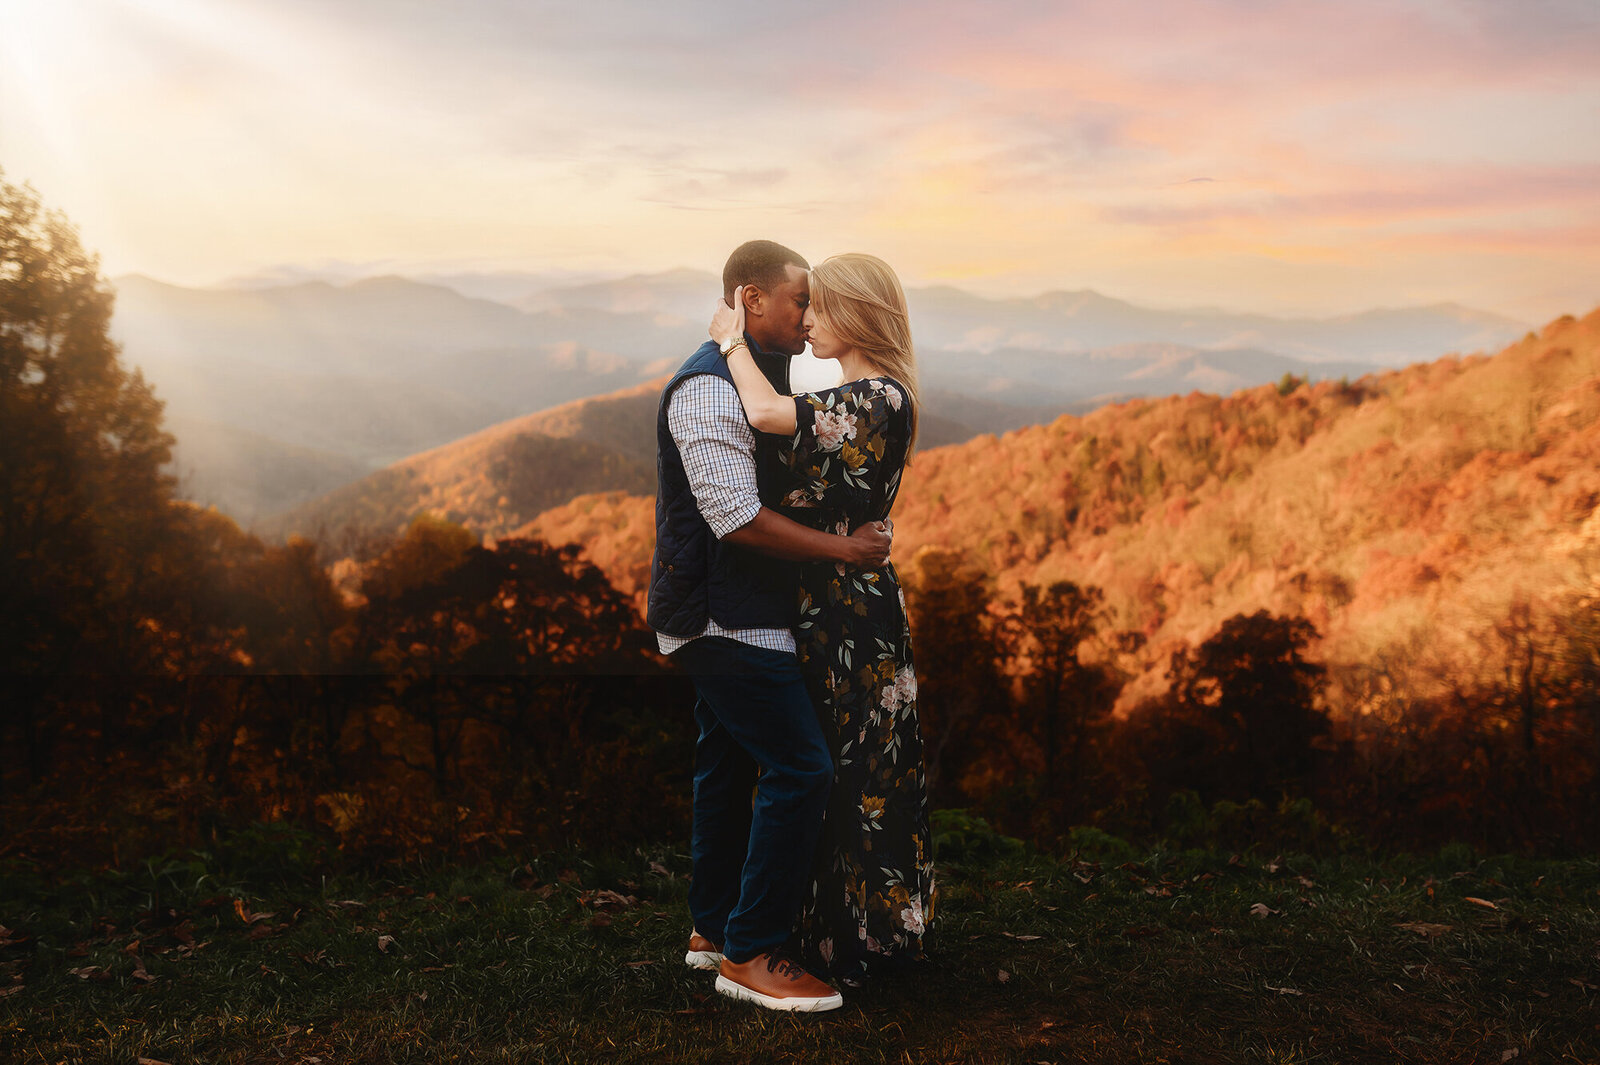 An engaged couple poses for Engagement Photos on the Blue Ridge Parkway in Asheville, NC.